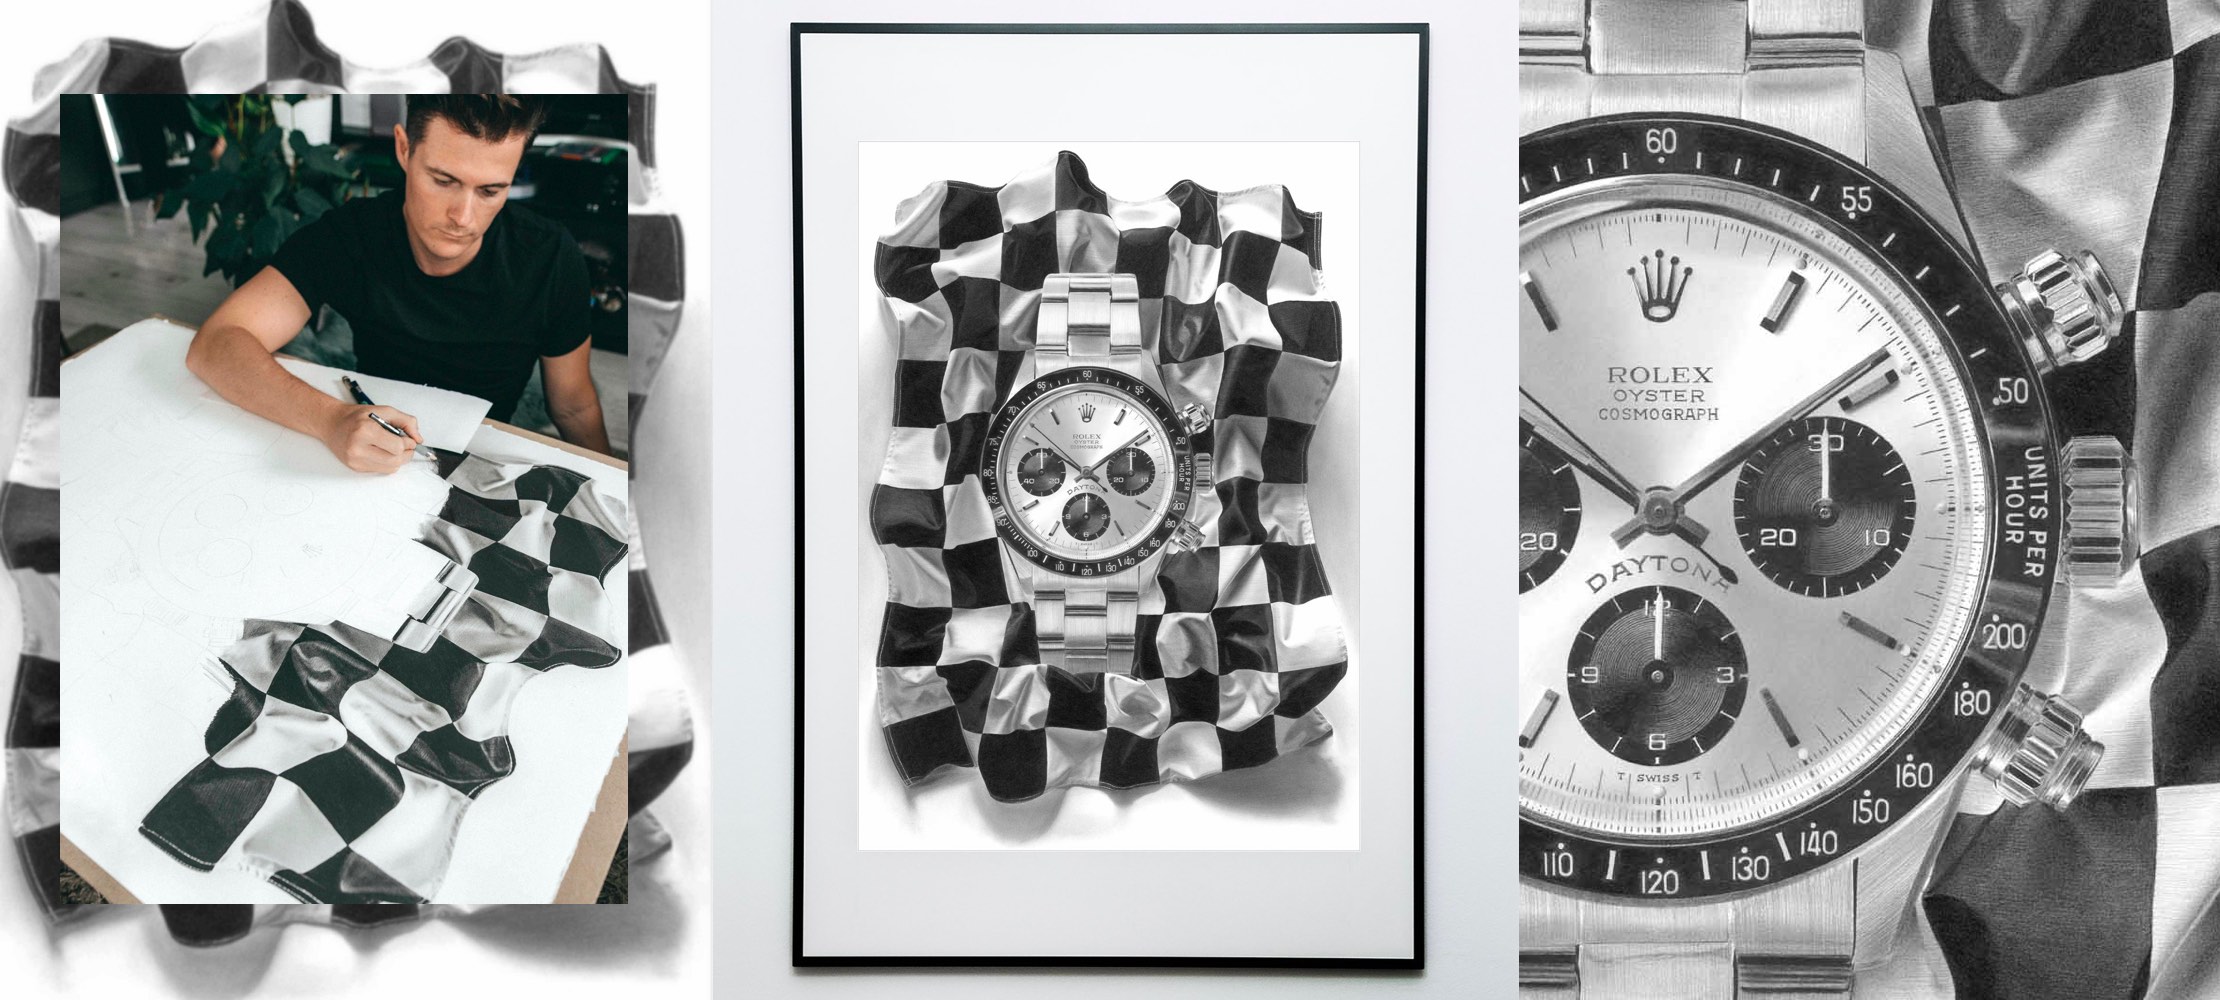 Art Tribute To The Rolex Cosmograph Daytona 6263: New Horological